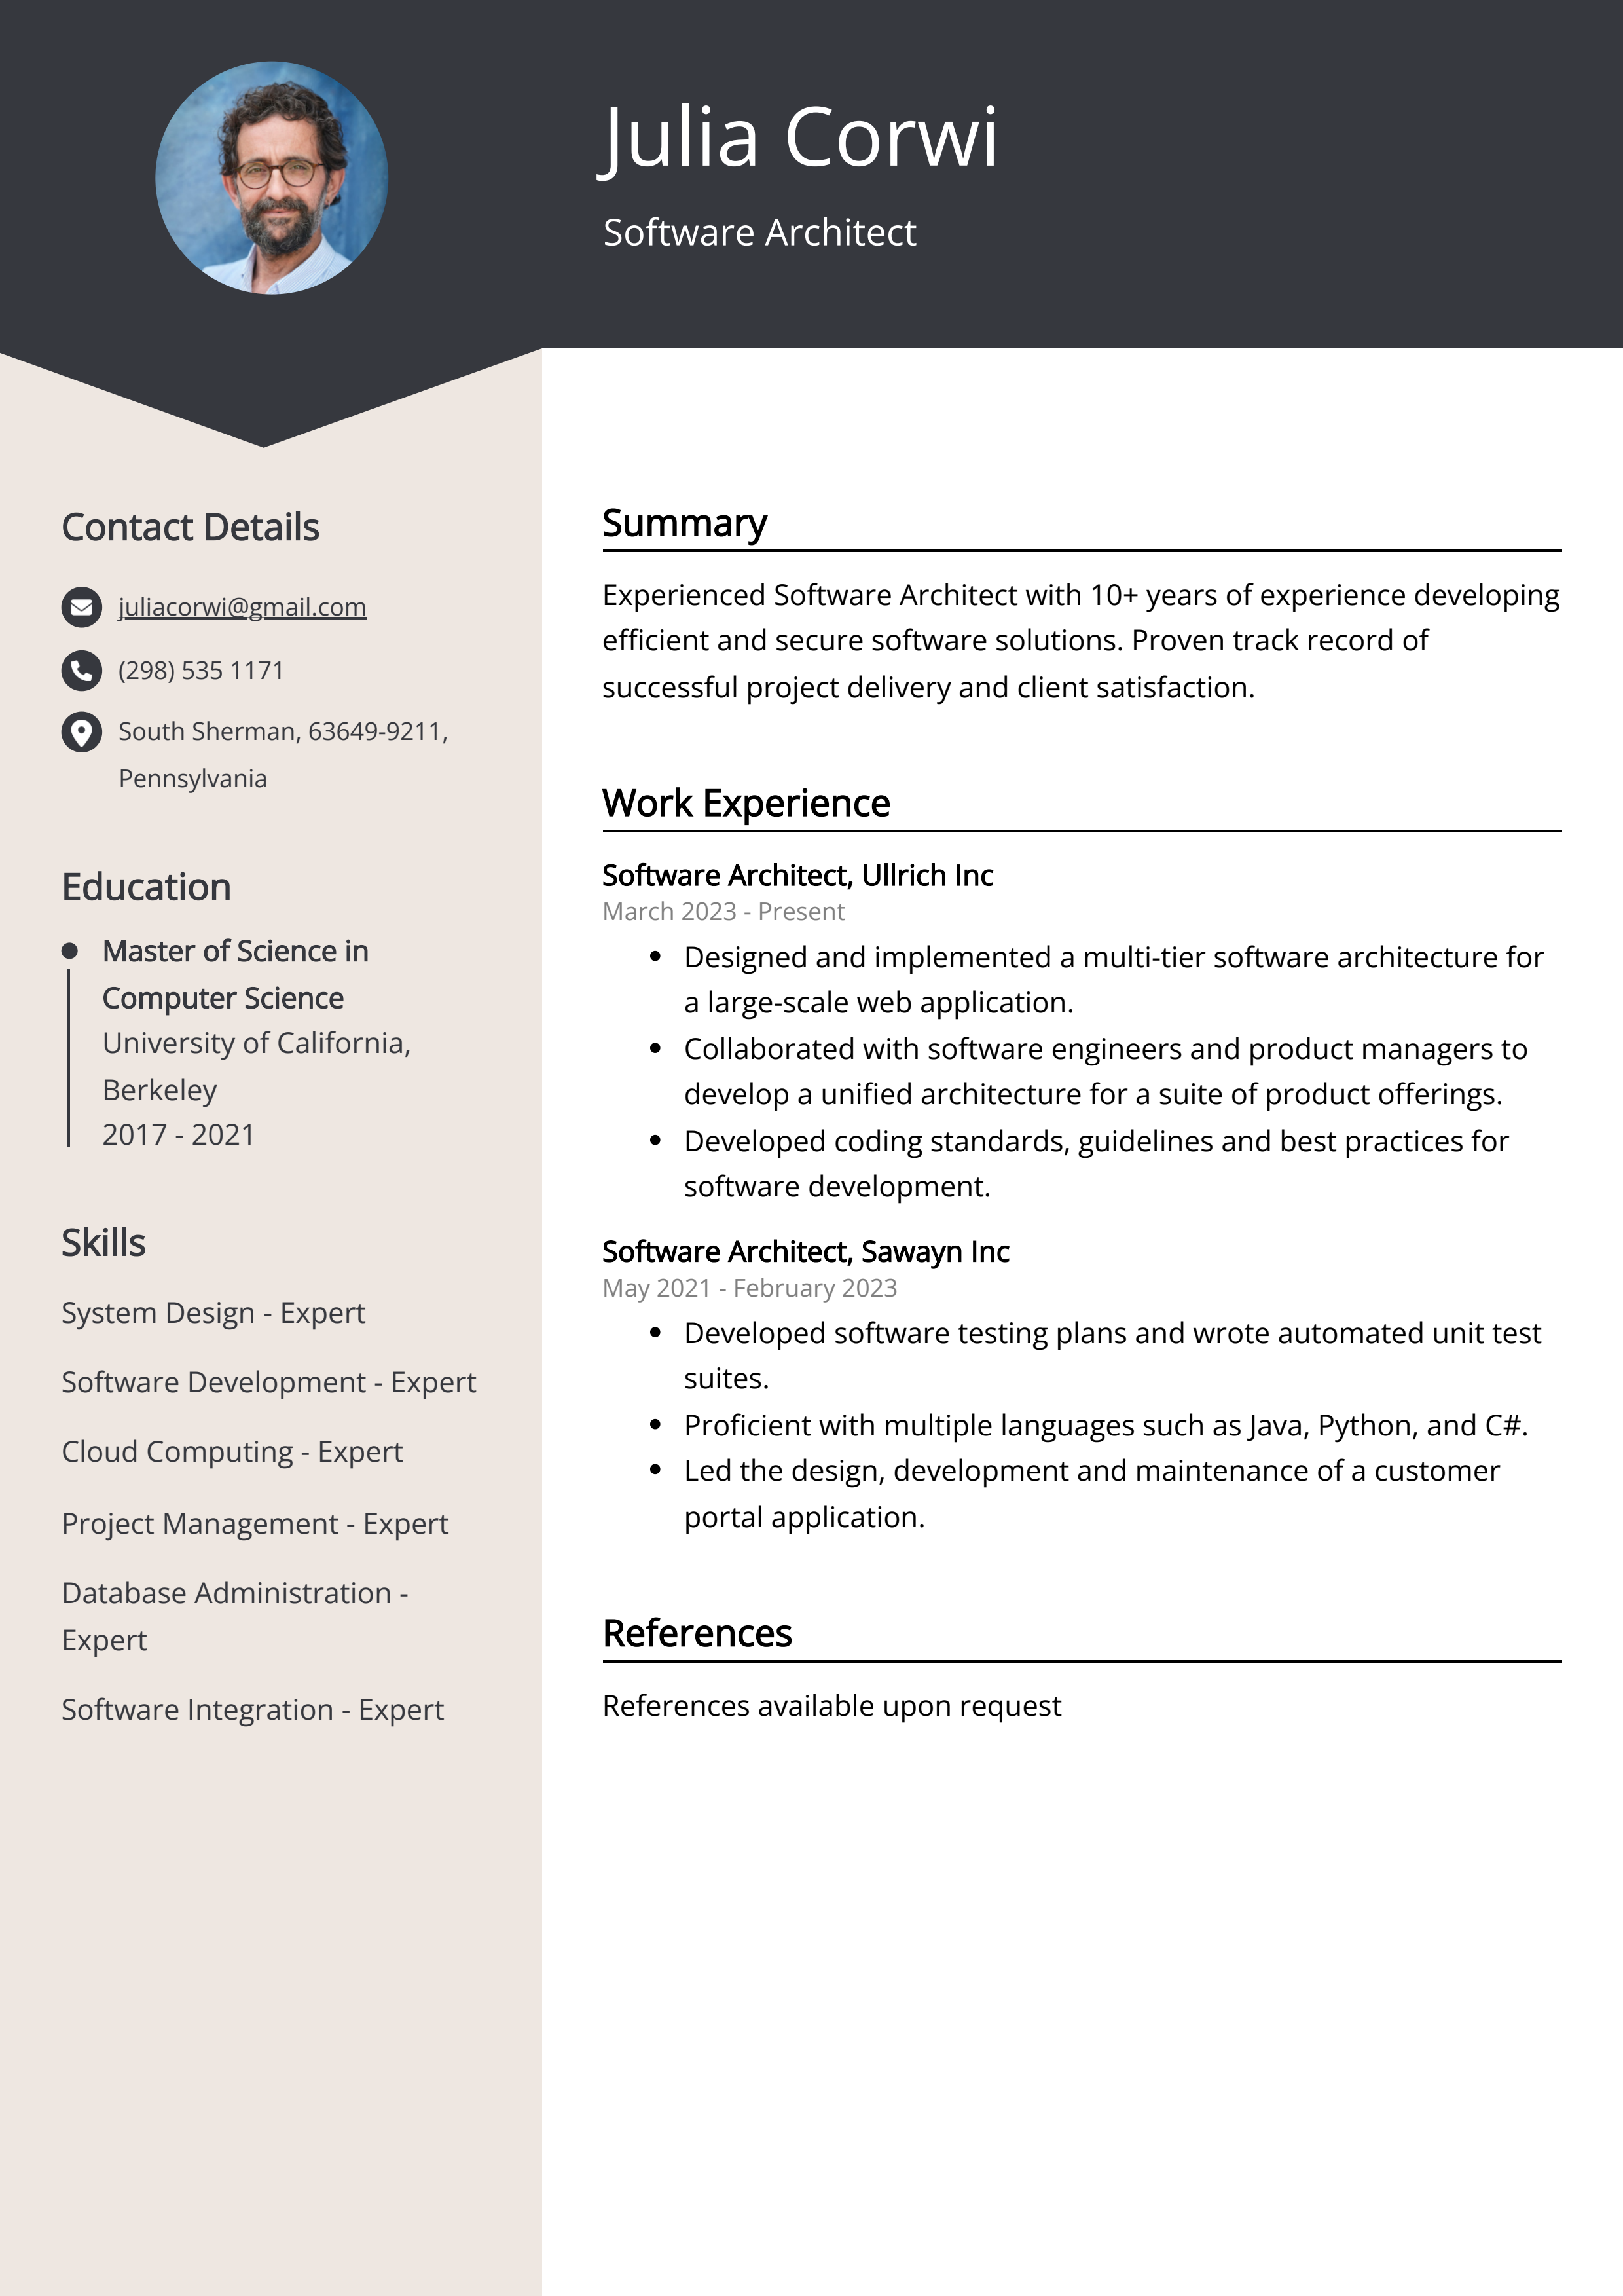 Software Architect CV Example